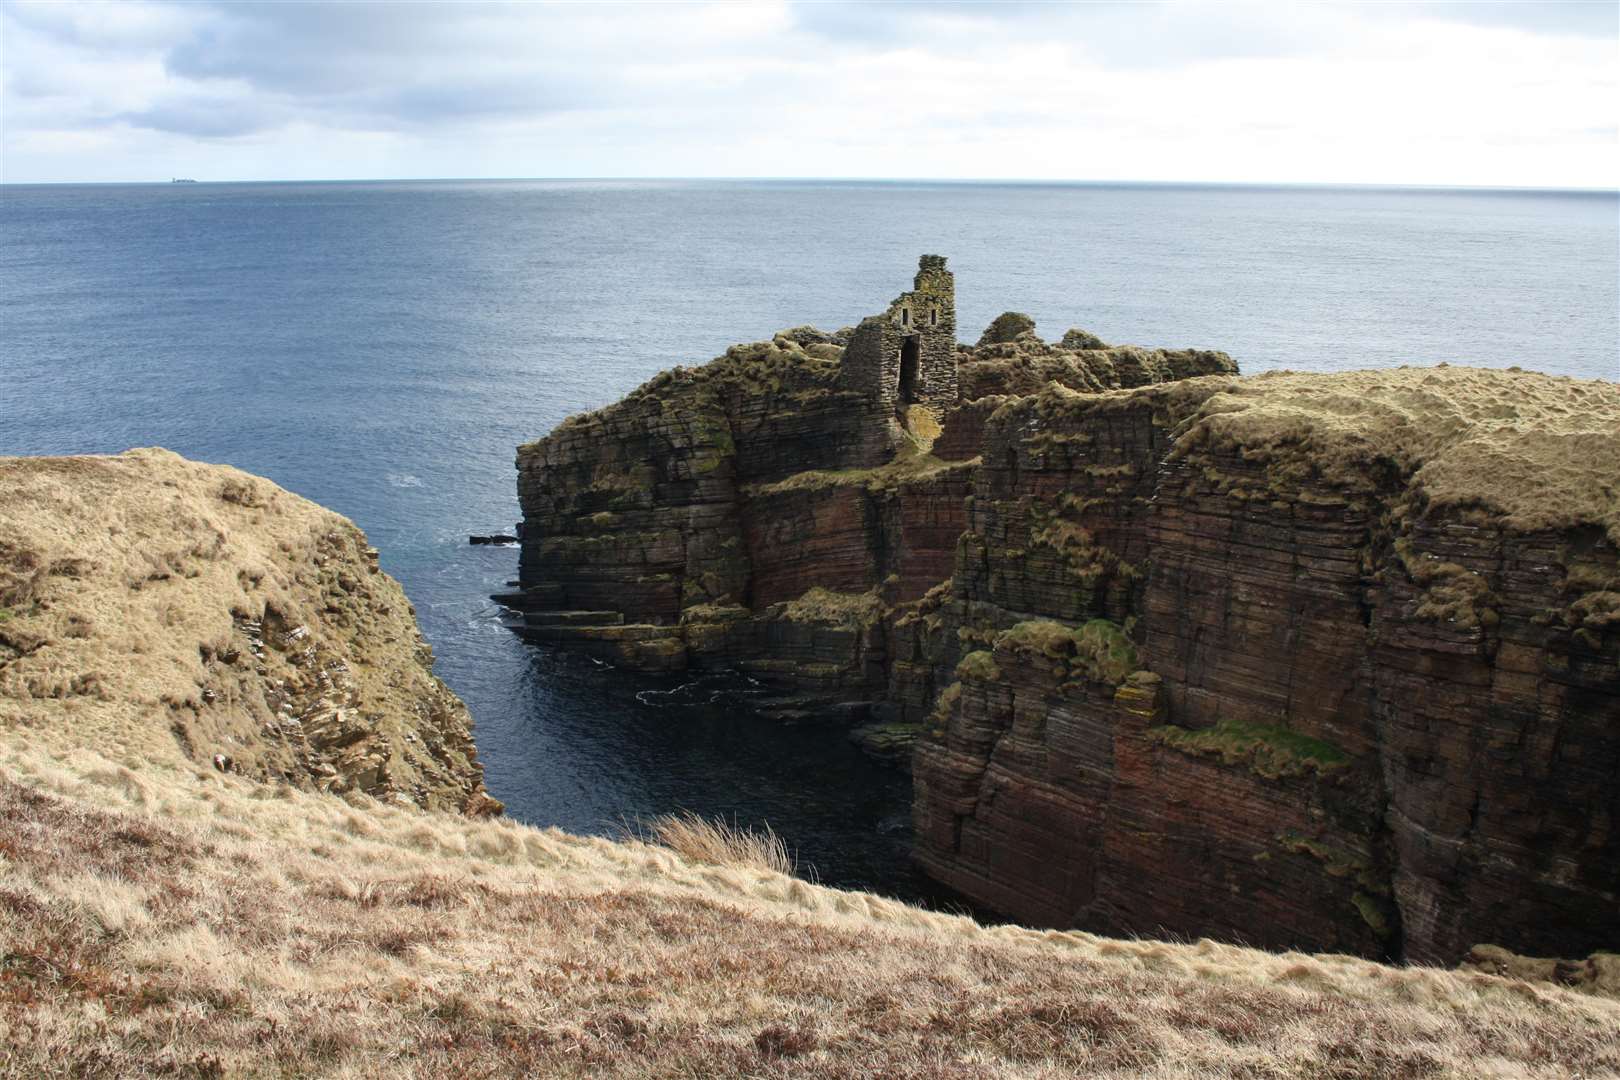 Lambaborg, the Caithness stronghold of Sweyn Asliefsson in Caithness, south of Freswick bay. Nowadays it is known as Buchollie castle.